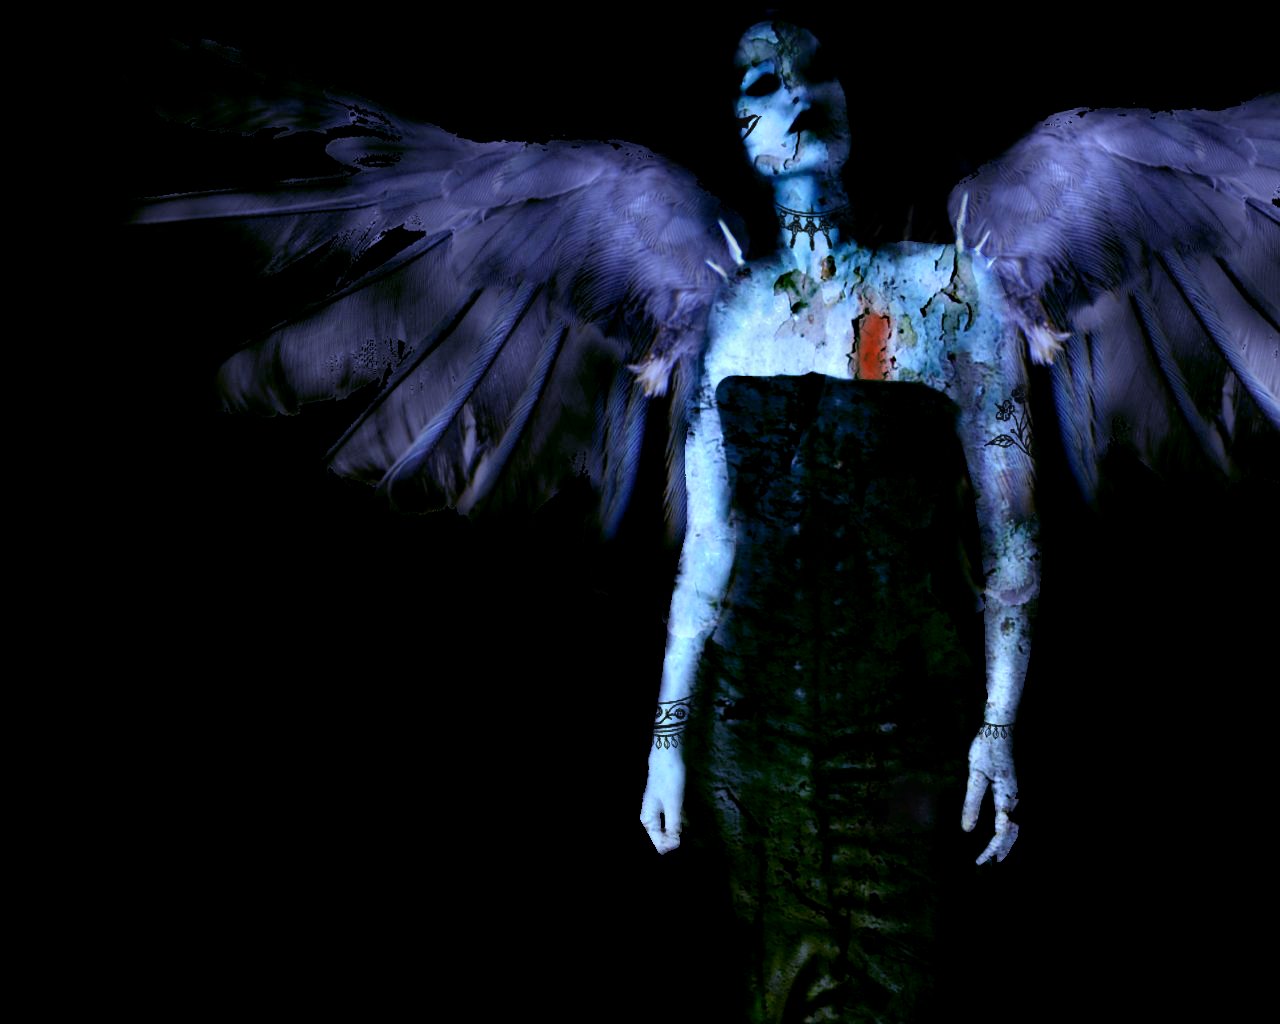 Horrified Gothic Angel wallpaper from Angels wallpapers